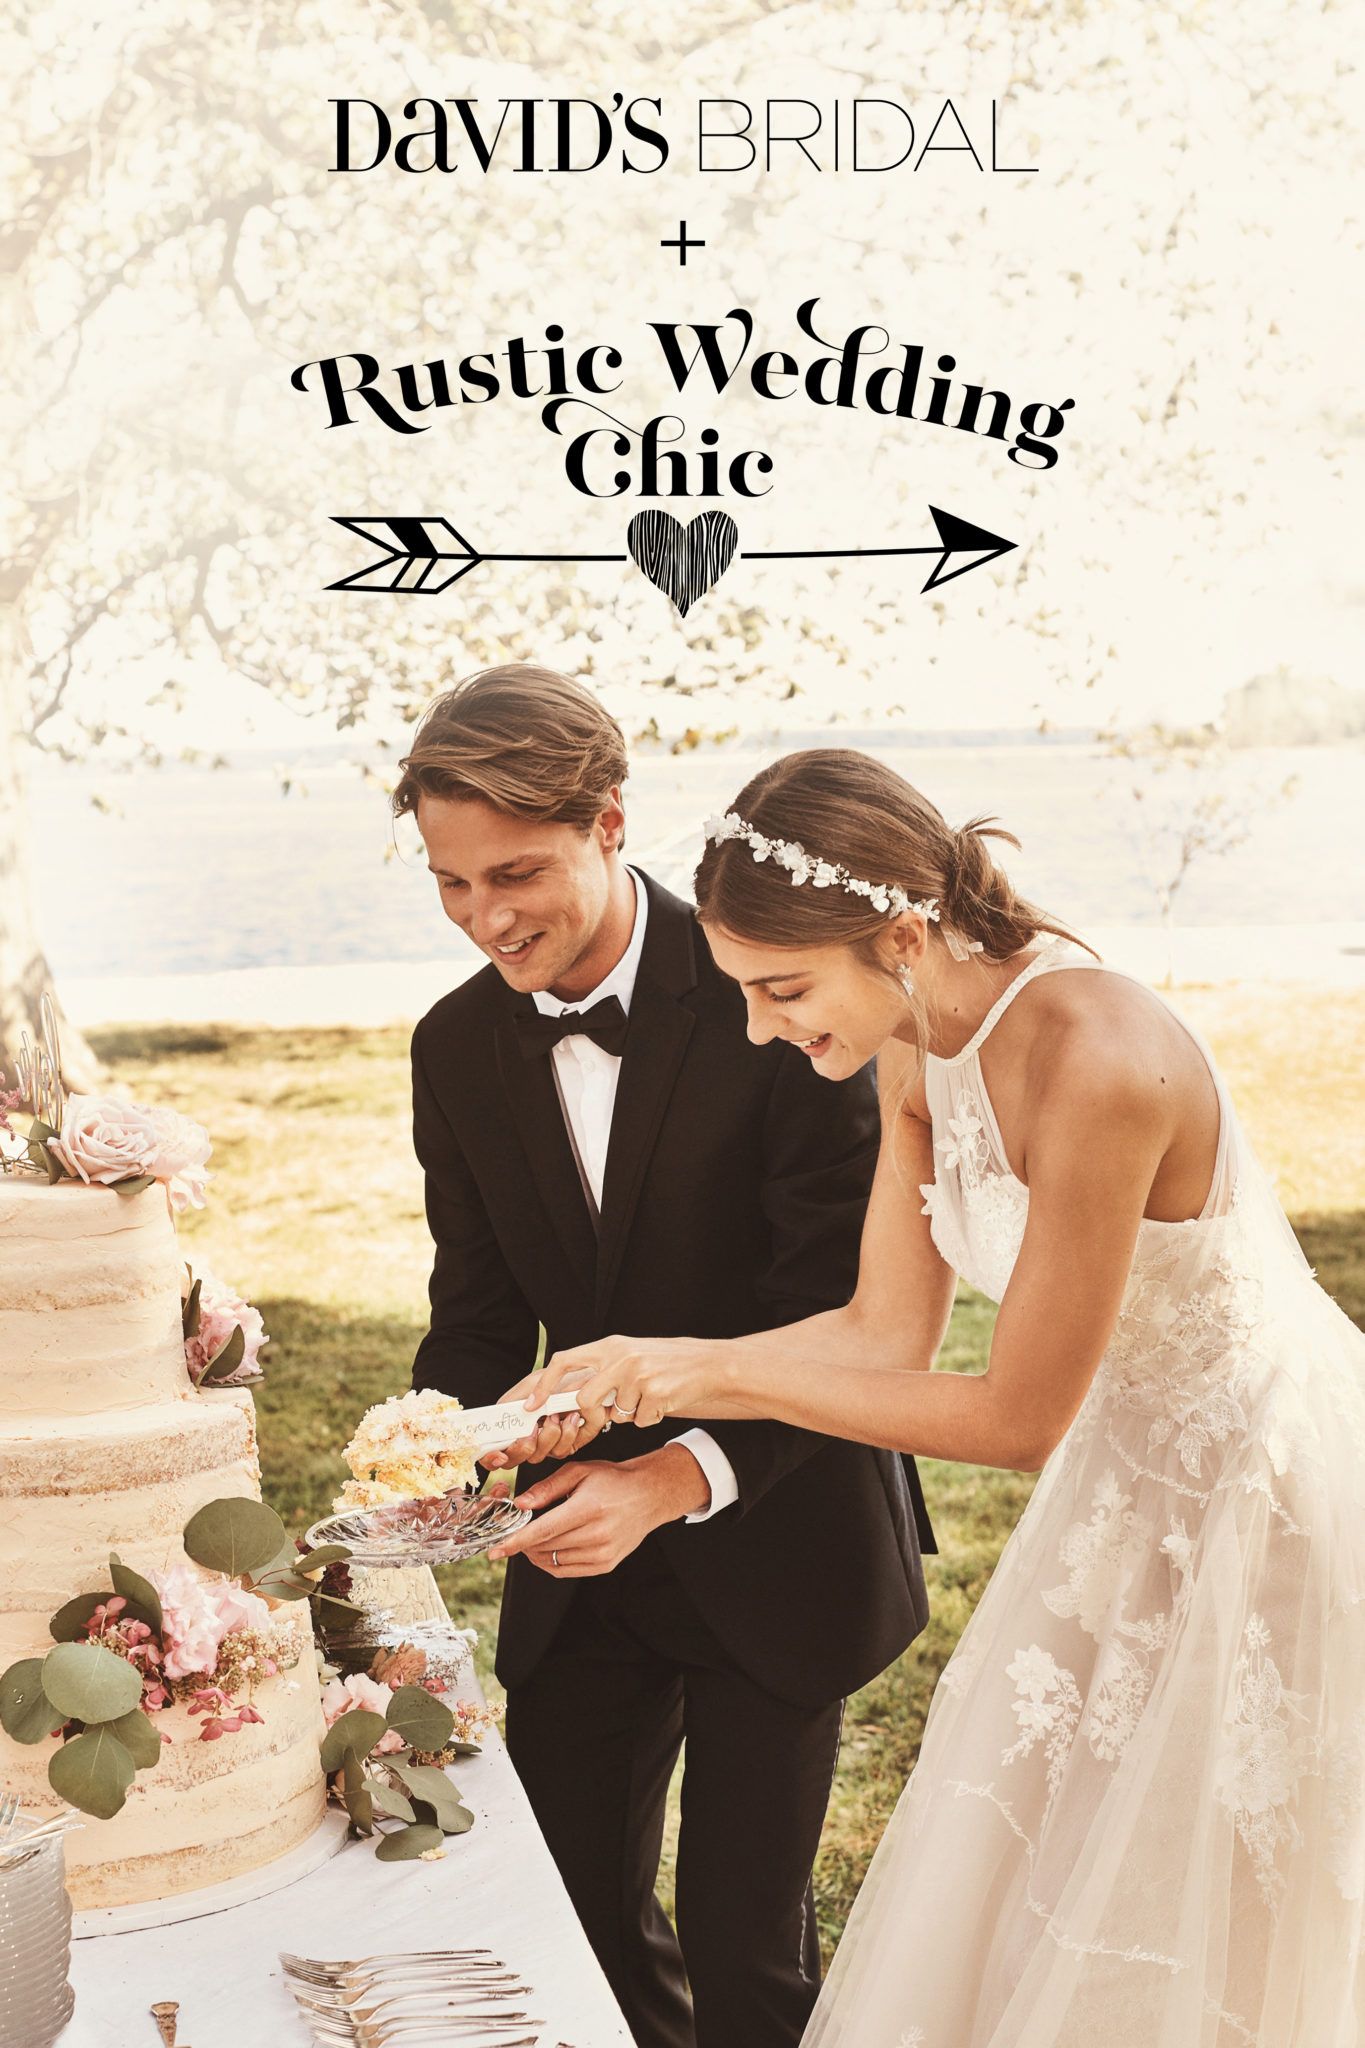 Rustic Wedding Chic Ties The Knot With David’s Bridal